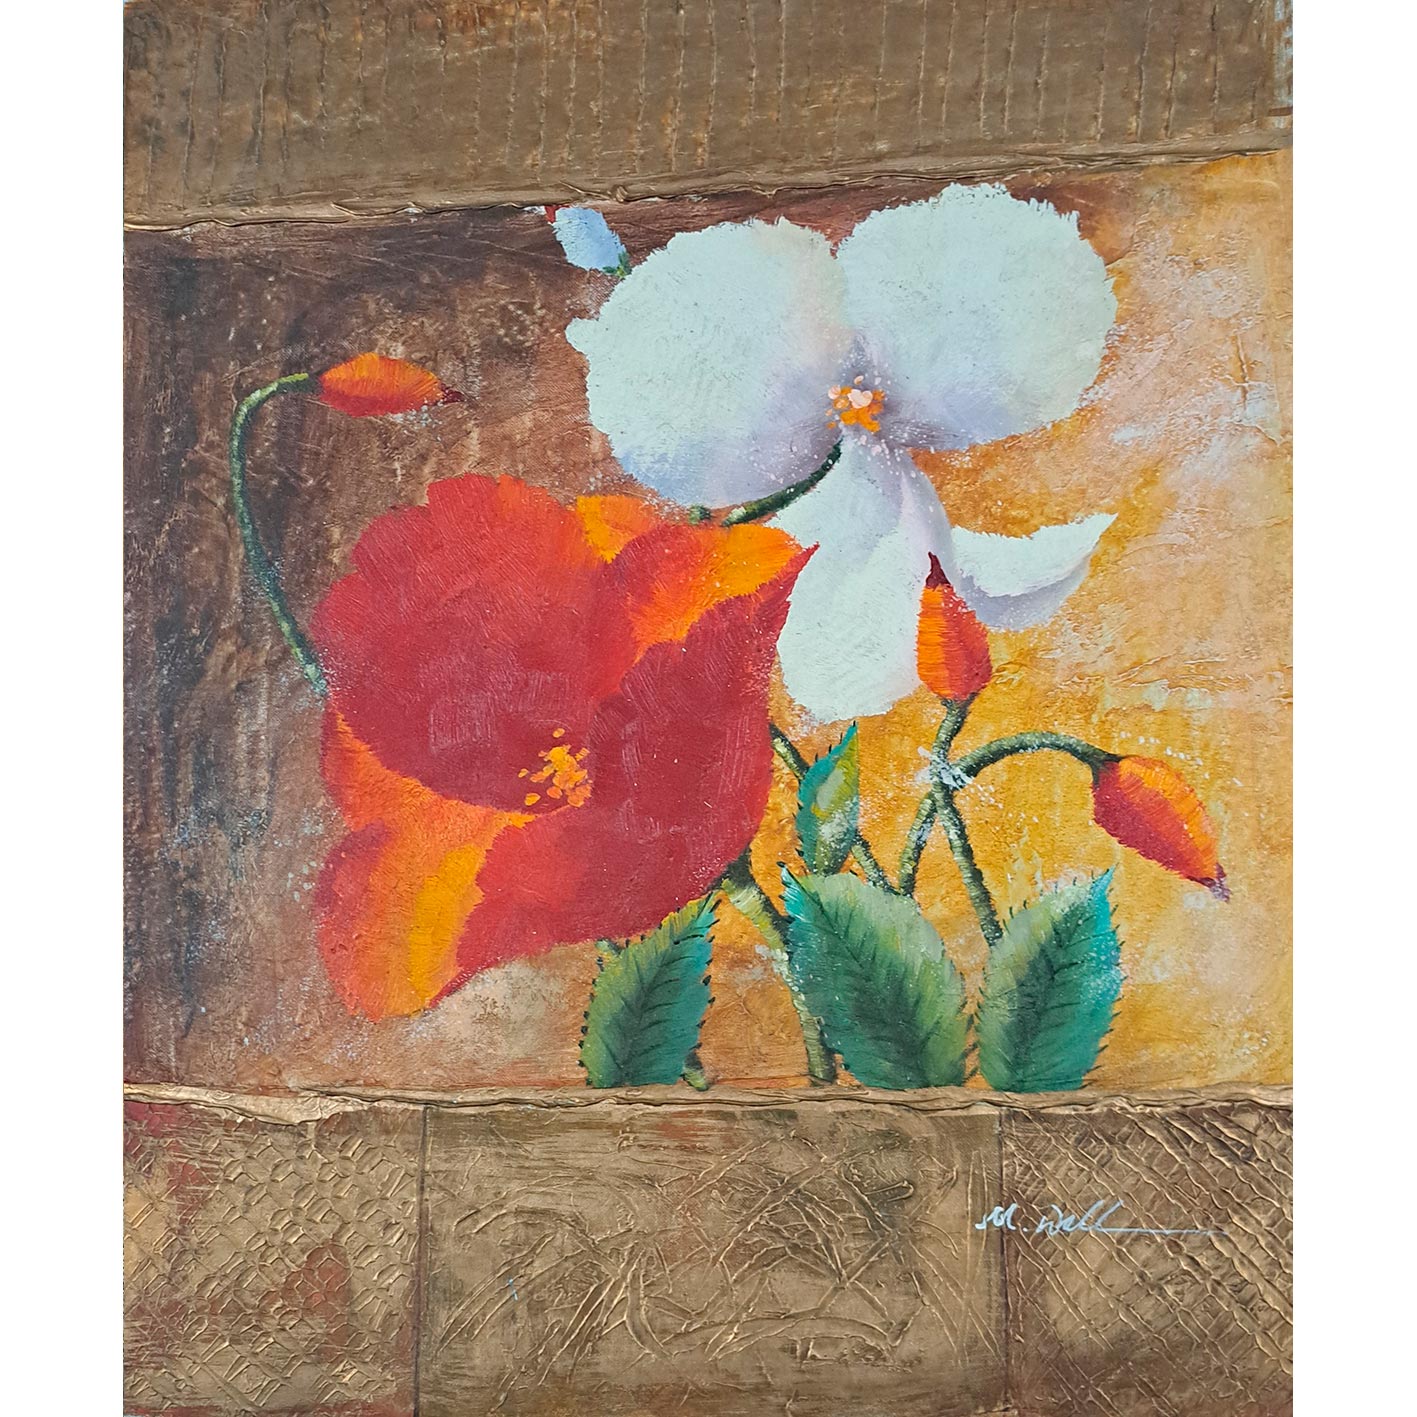 Colored Poppies Diptych Painting 50x60 cm [2 pieces]